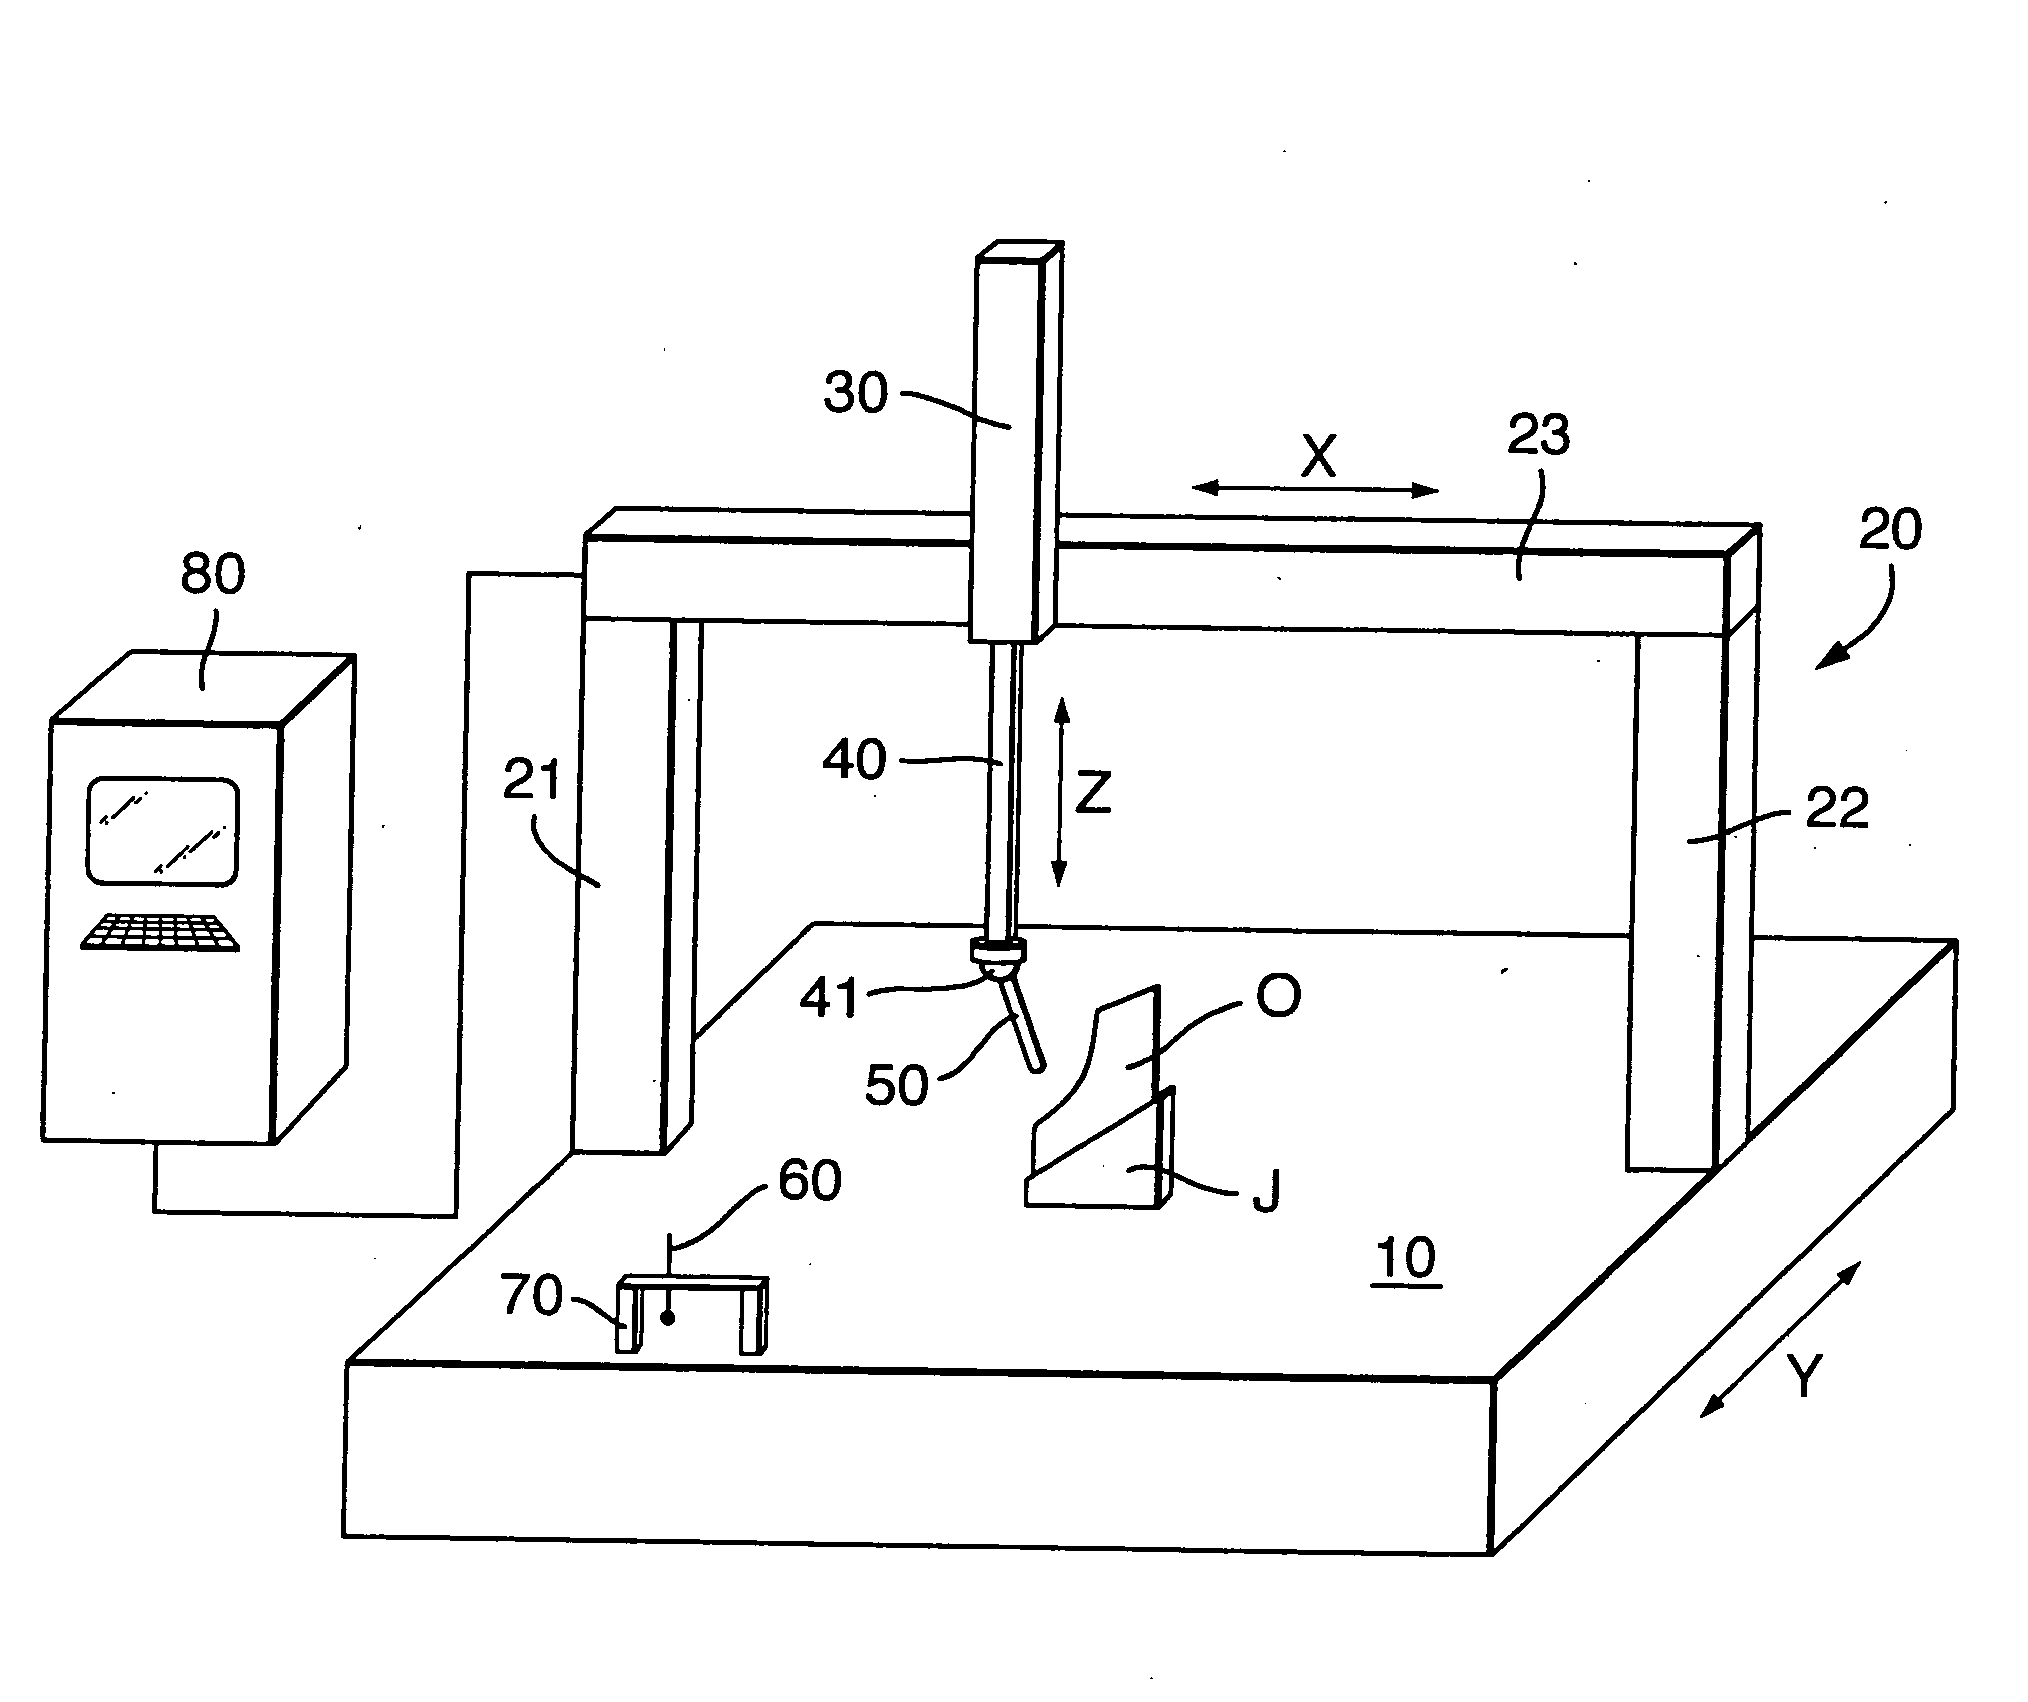 Apparatus for Measuring Wall Thicknesses of Objects